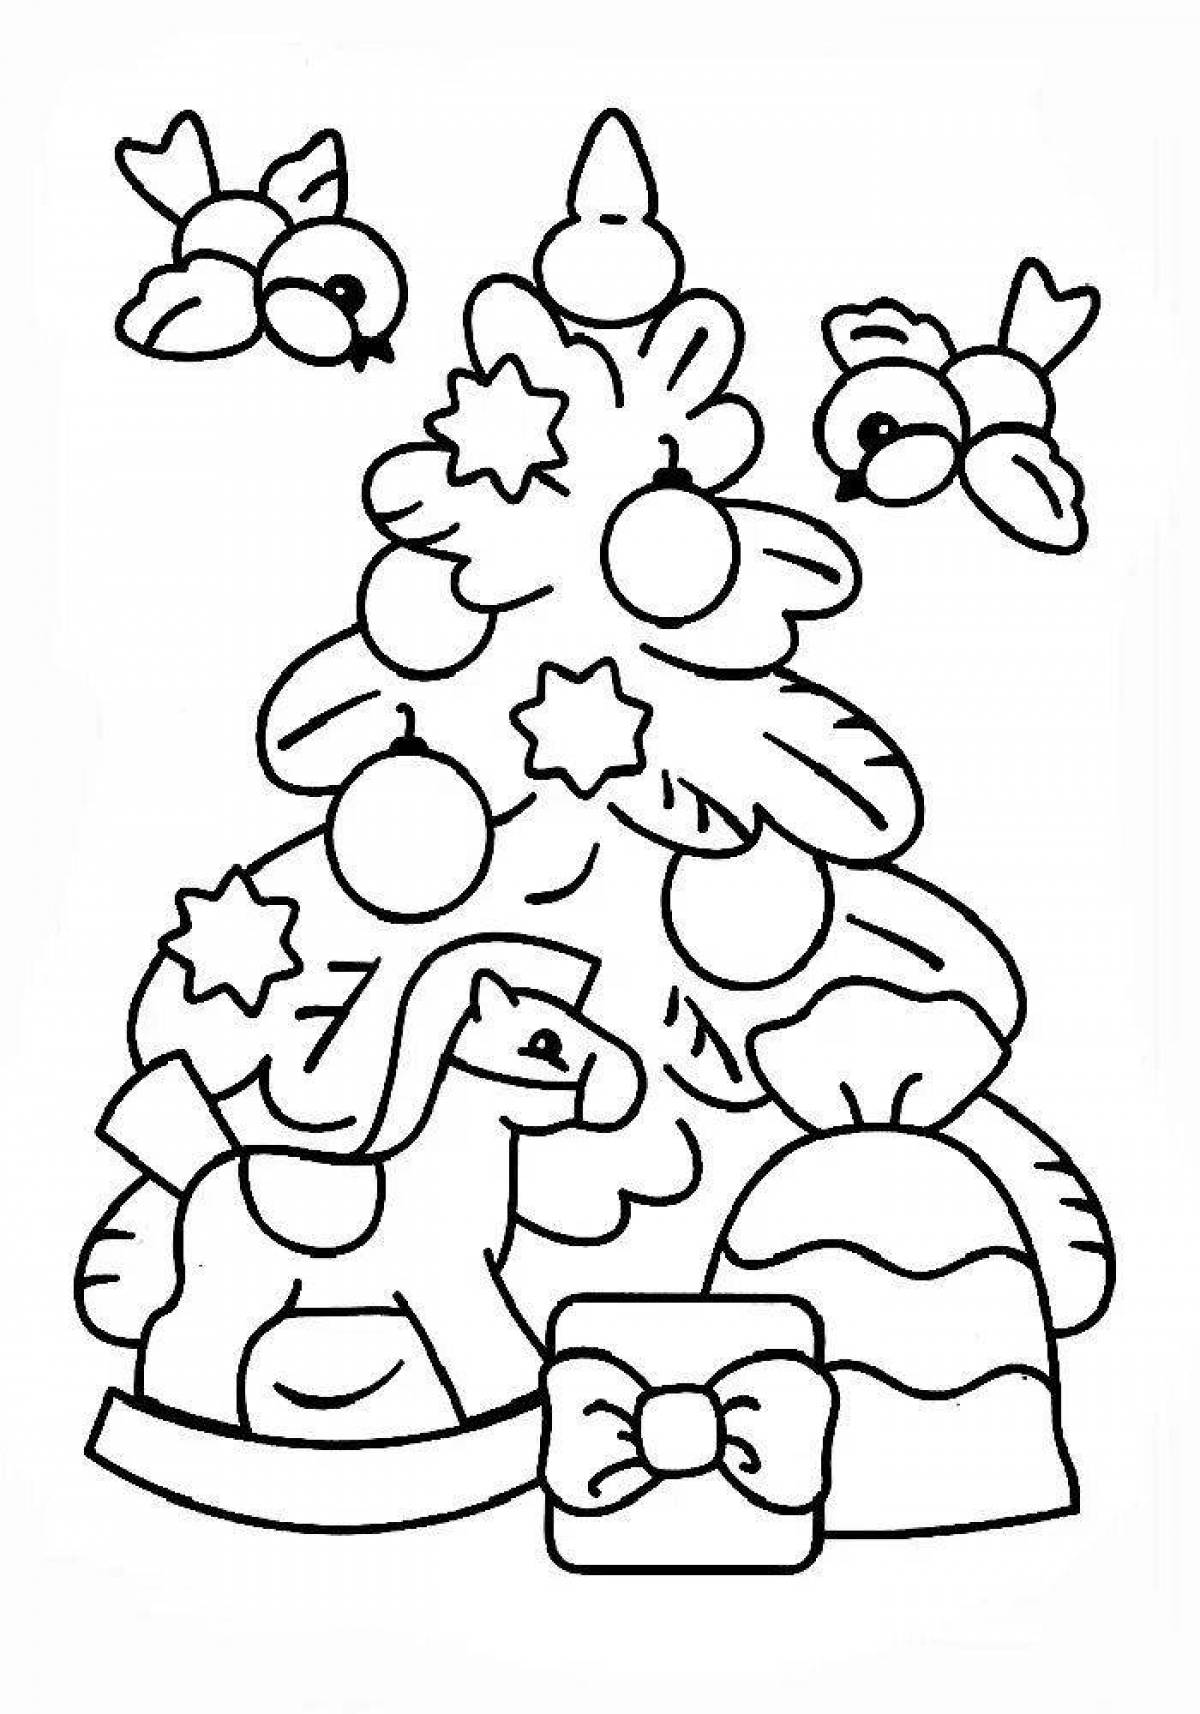 Sparkling Christmas tree and rabbit coloring book